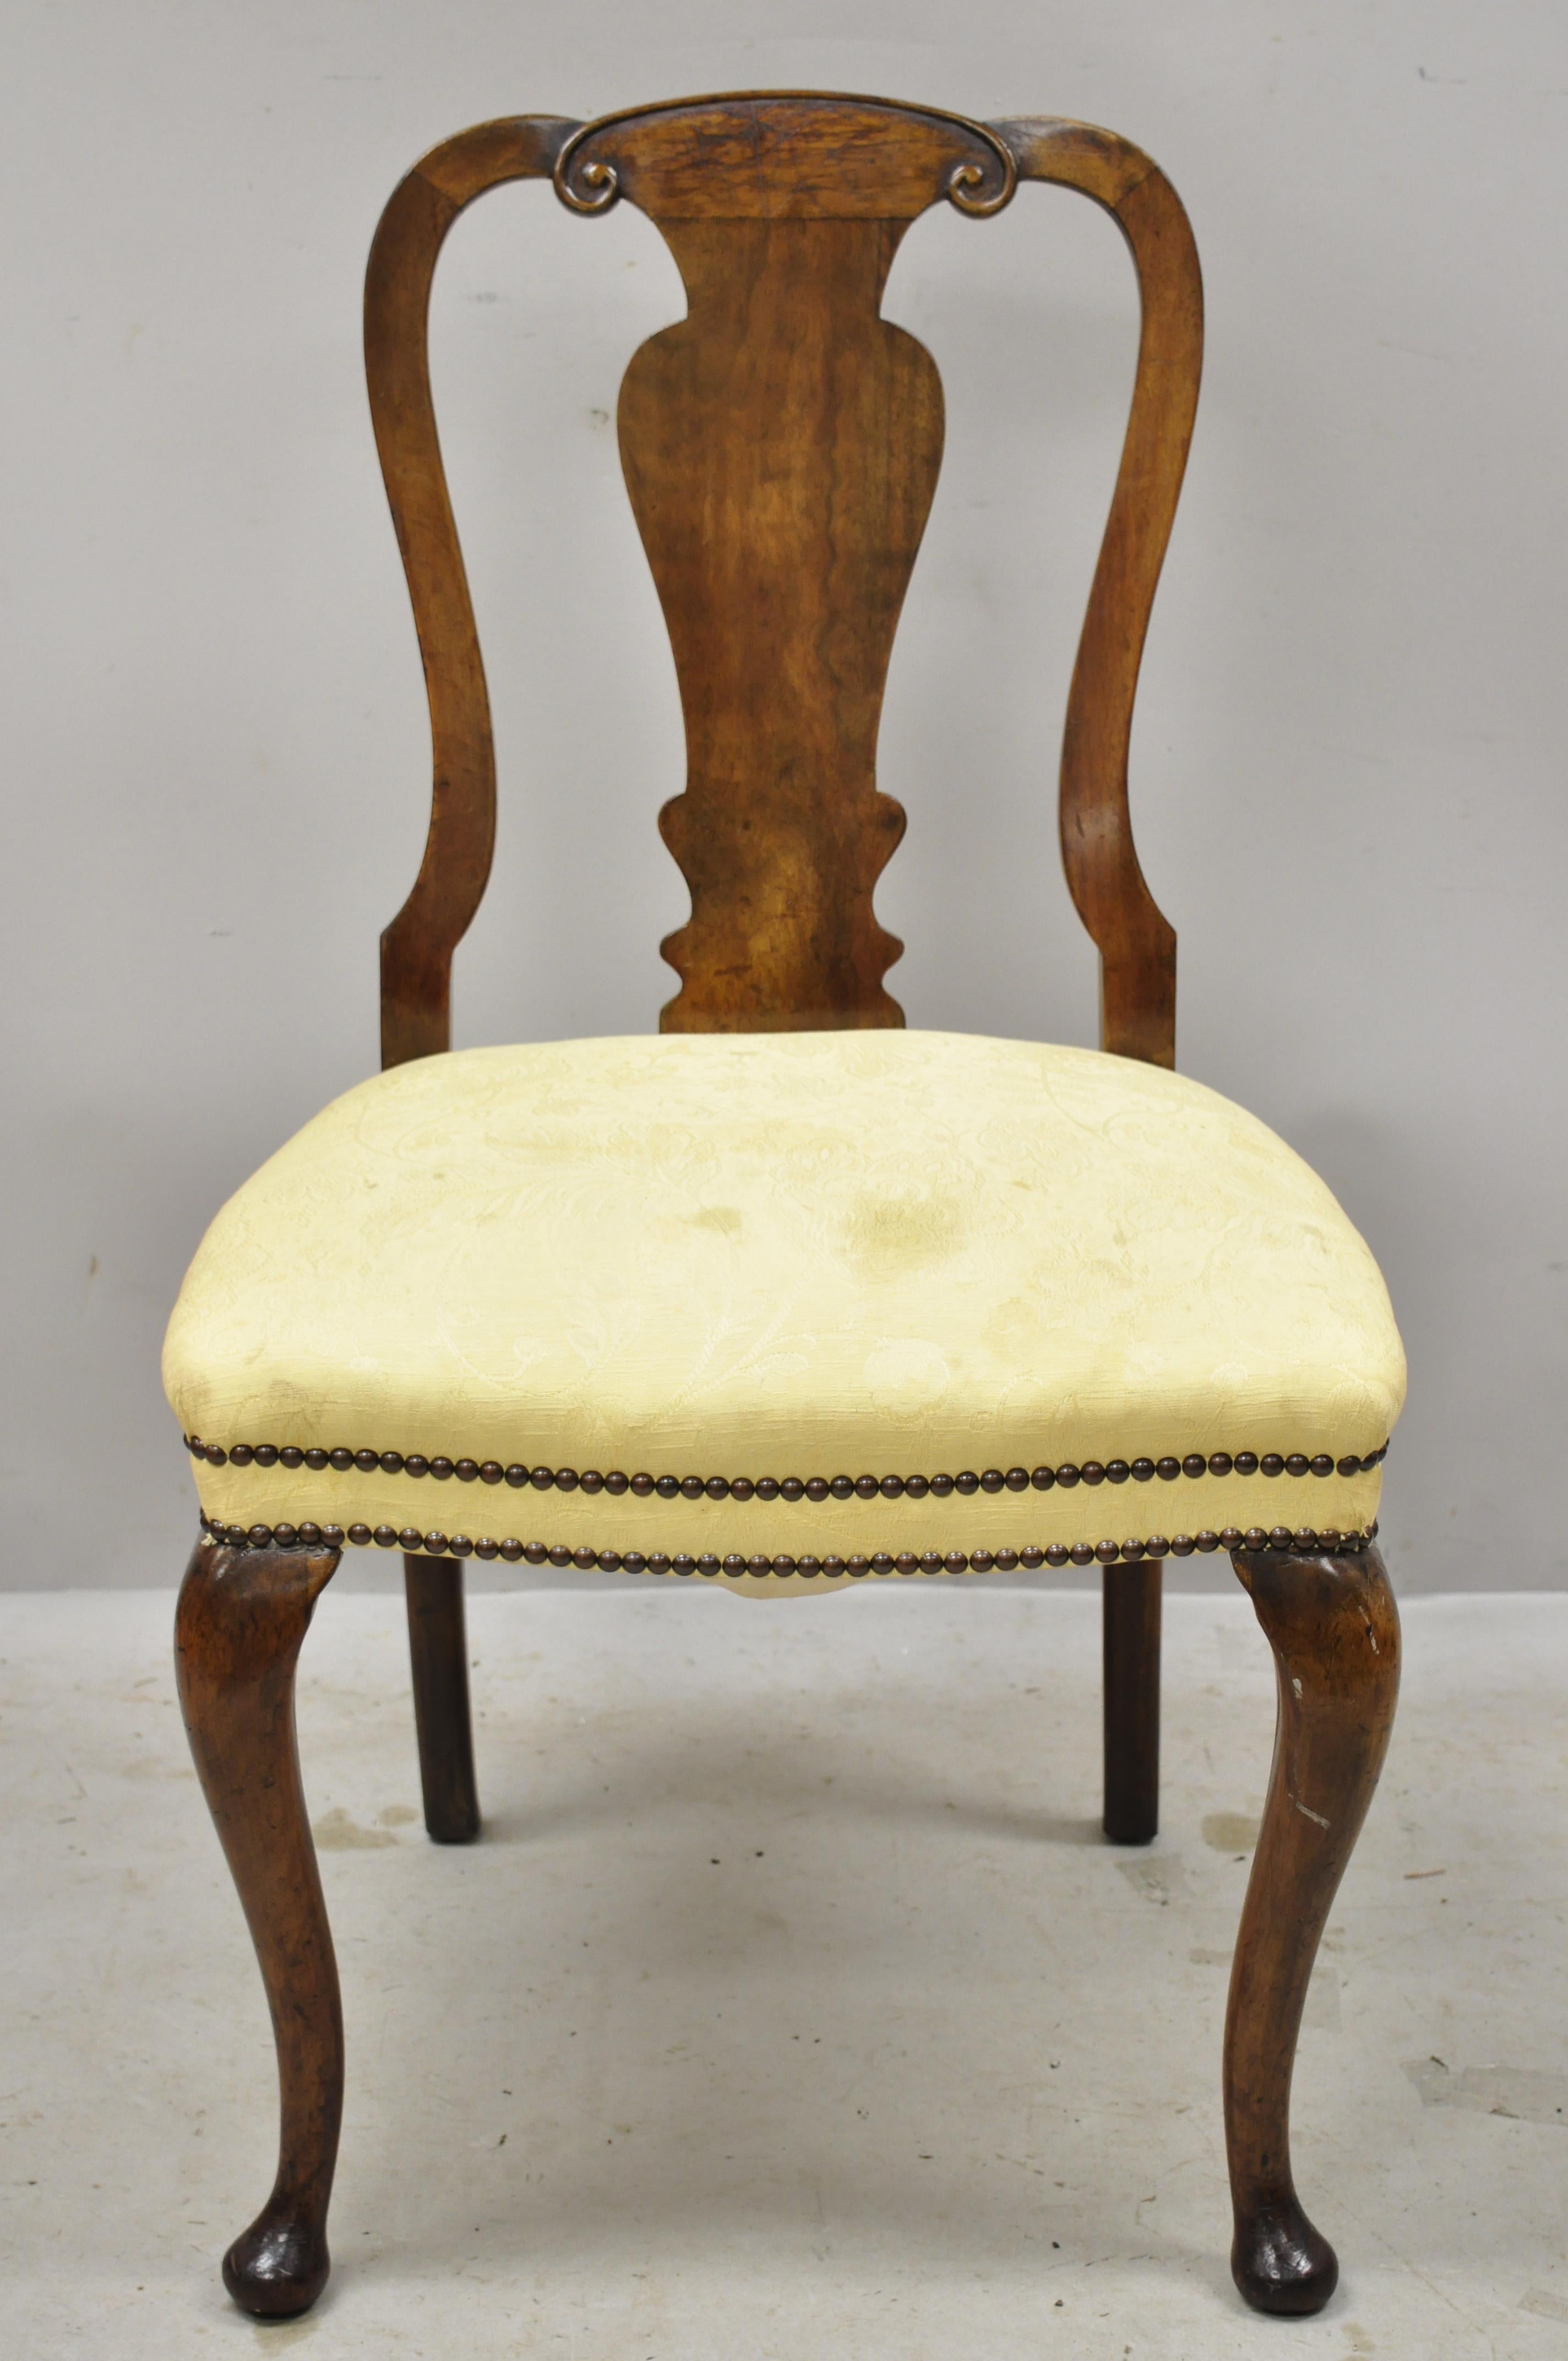 Antique 19th century English Queen Anne burr walnut splat back dining side chair. Item features remarkable aged patina, shapely Queen Anne legs, solid wood frame, beautiful wood grain, nicely carved details, very nice antique item, great style and